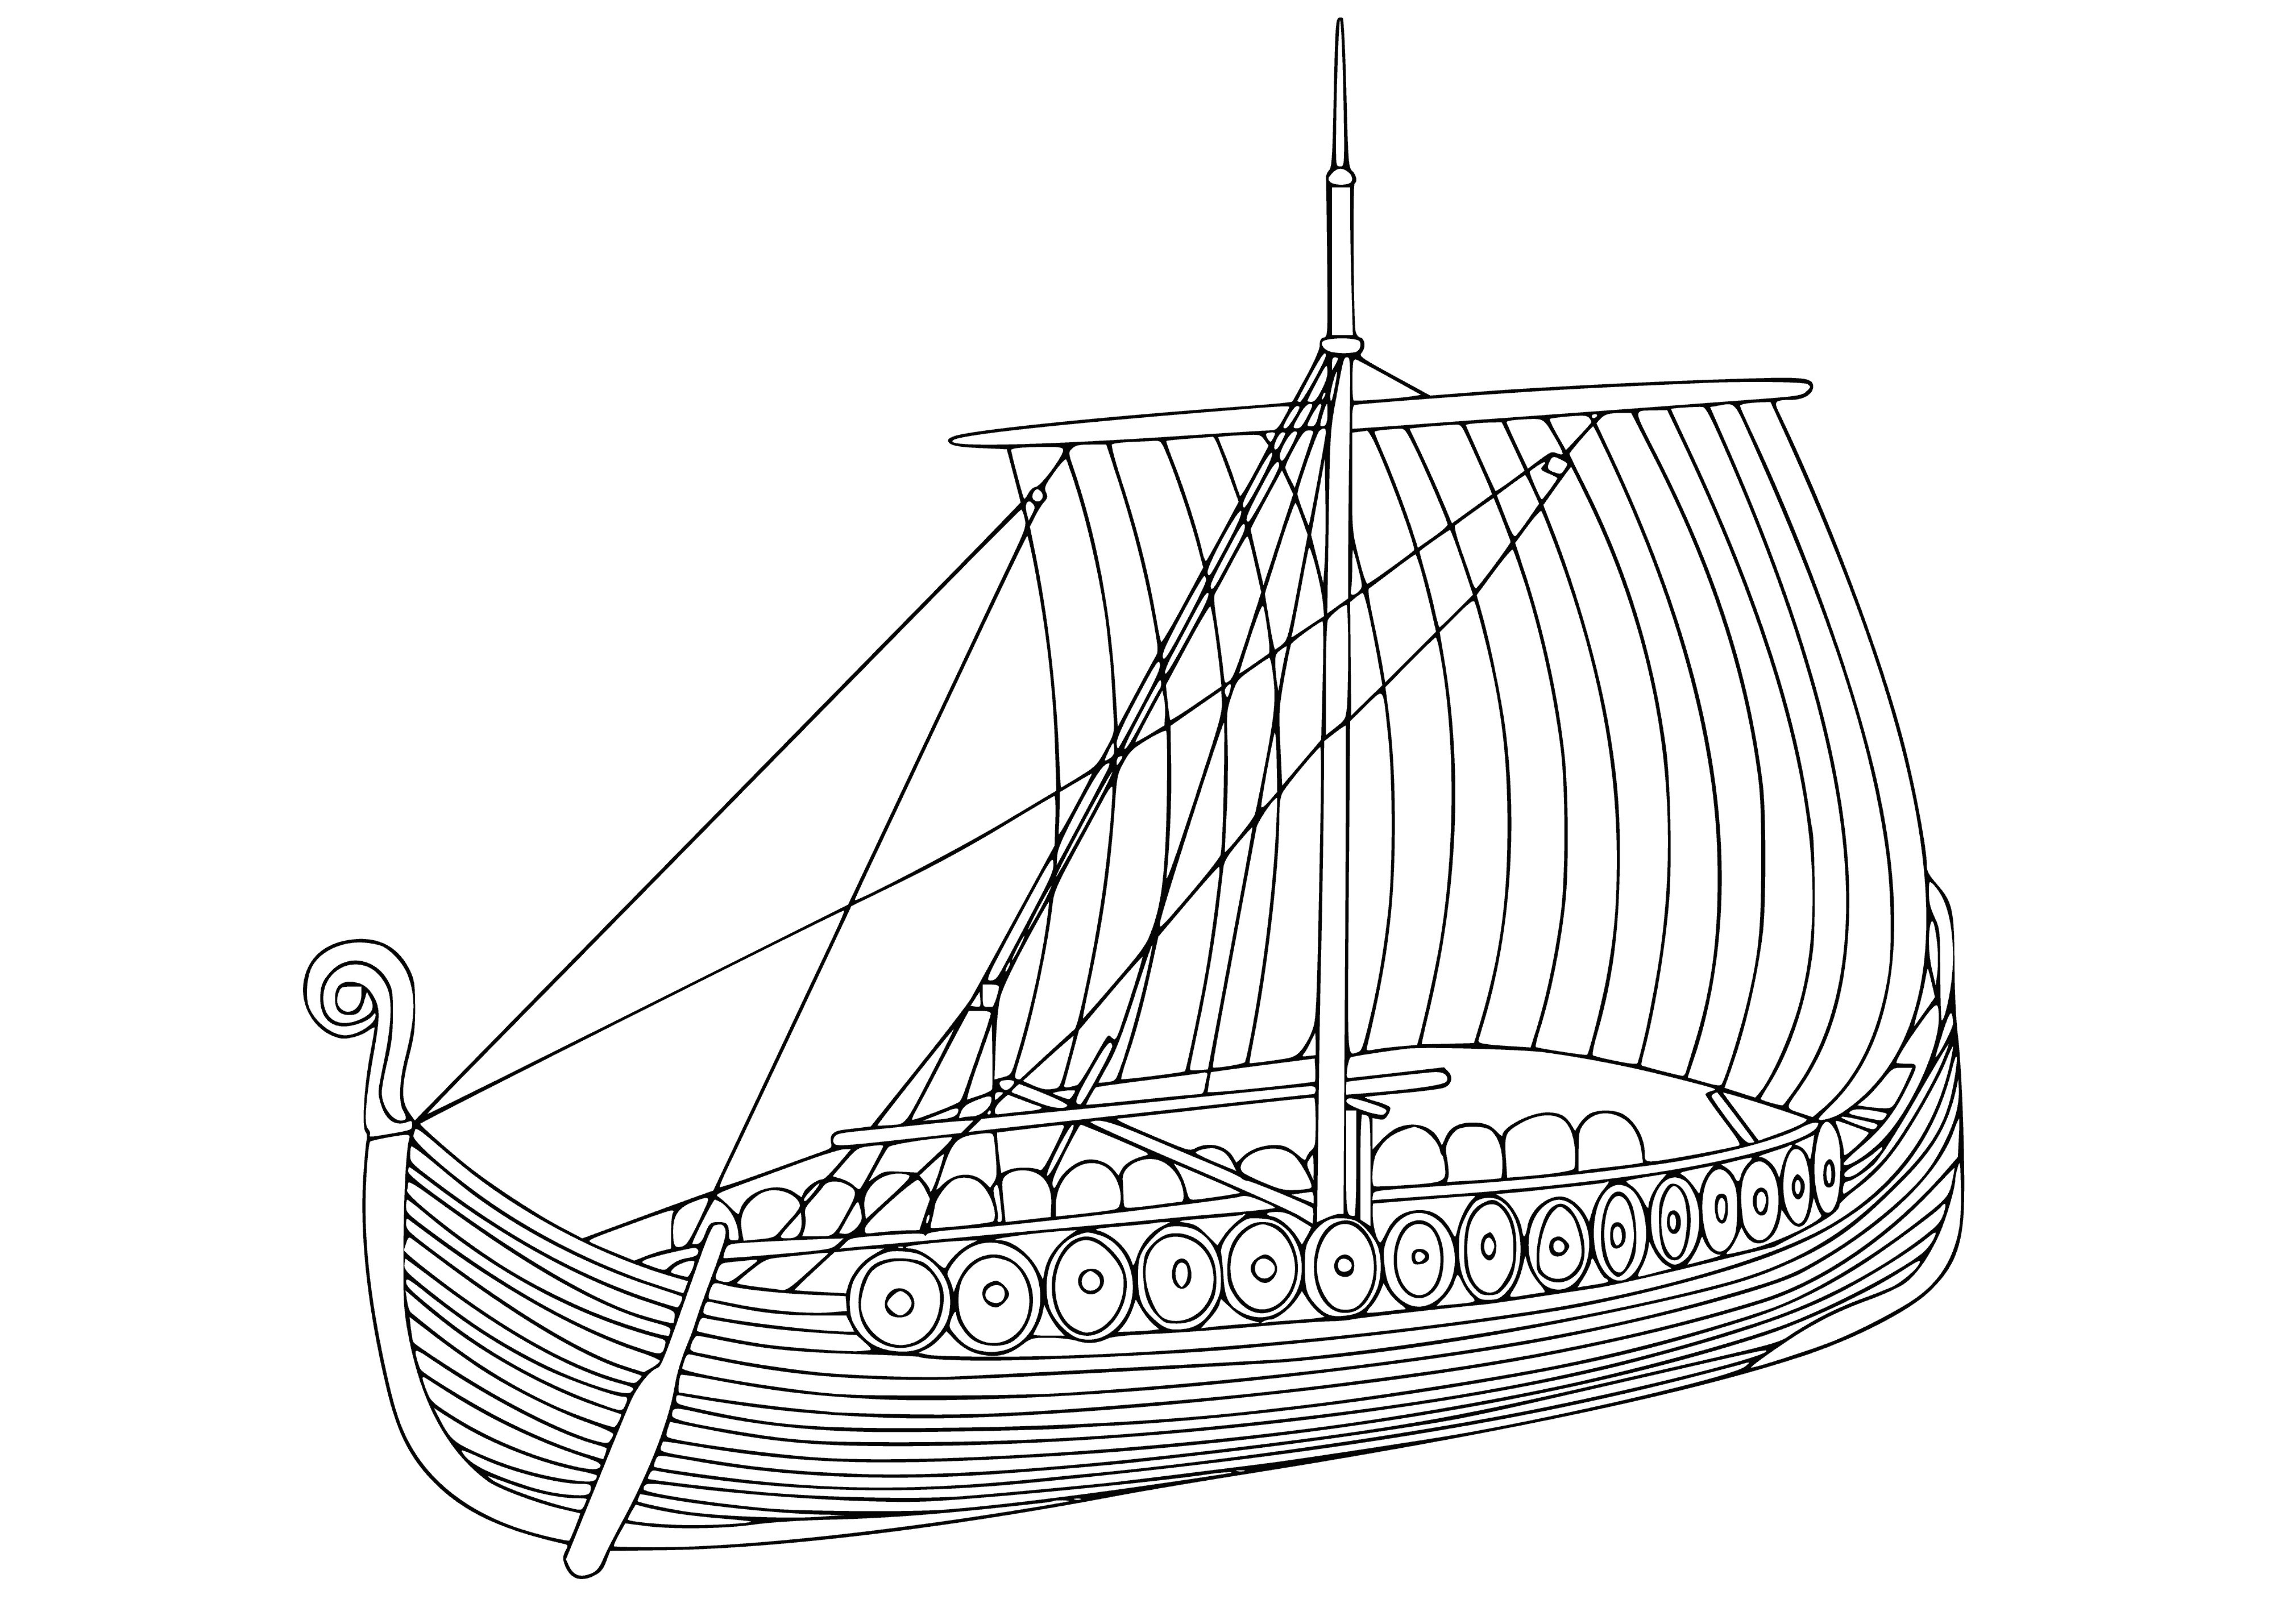 coloring page: Vikings used drakkar – long, slender ships with a large, square sail, adorned with a dragon's head and a carved figurehead. Powered by oars, the clinker-built hull had benches for the rowers.